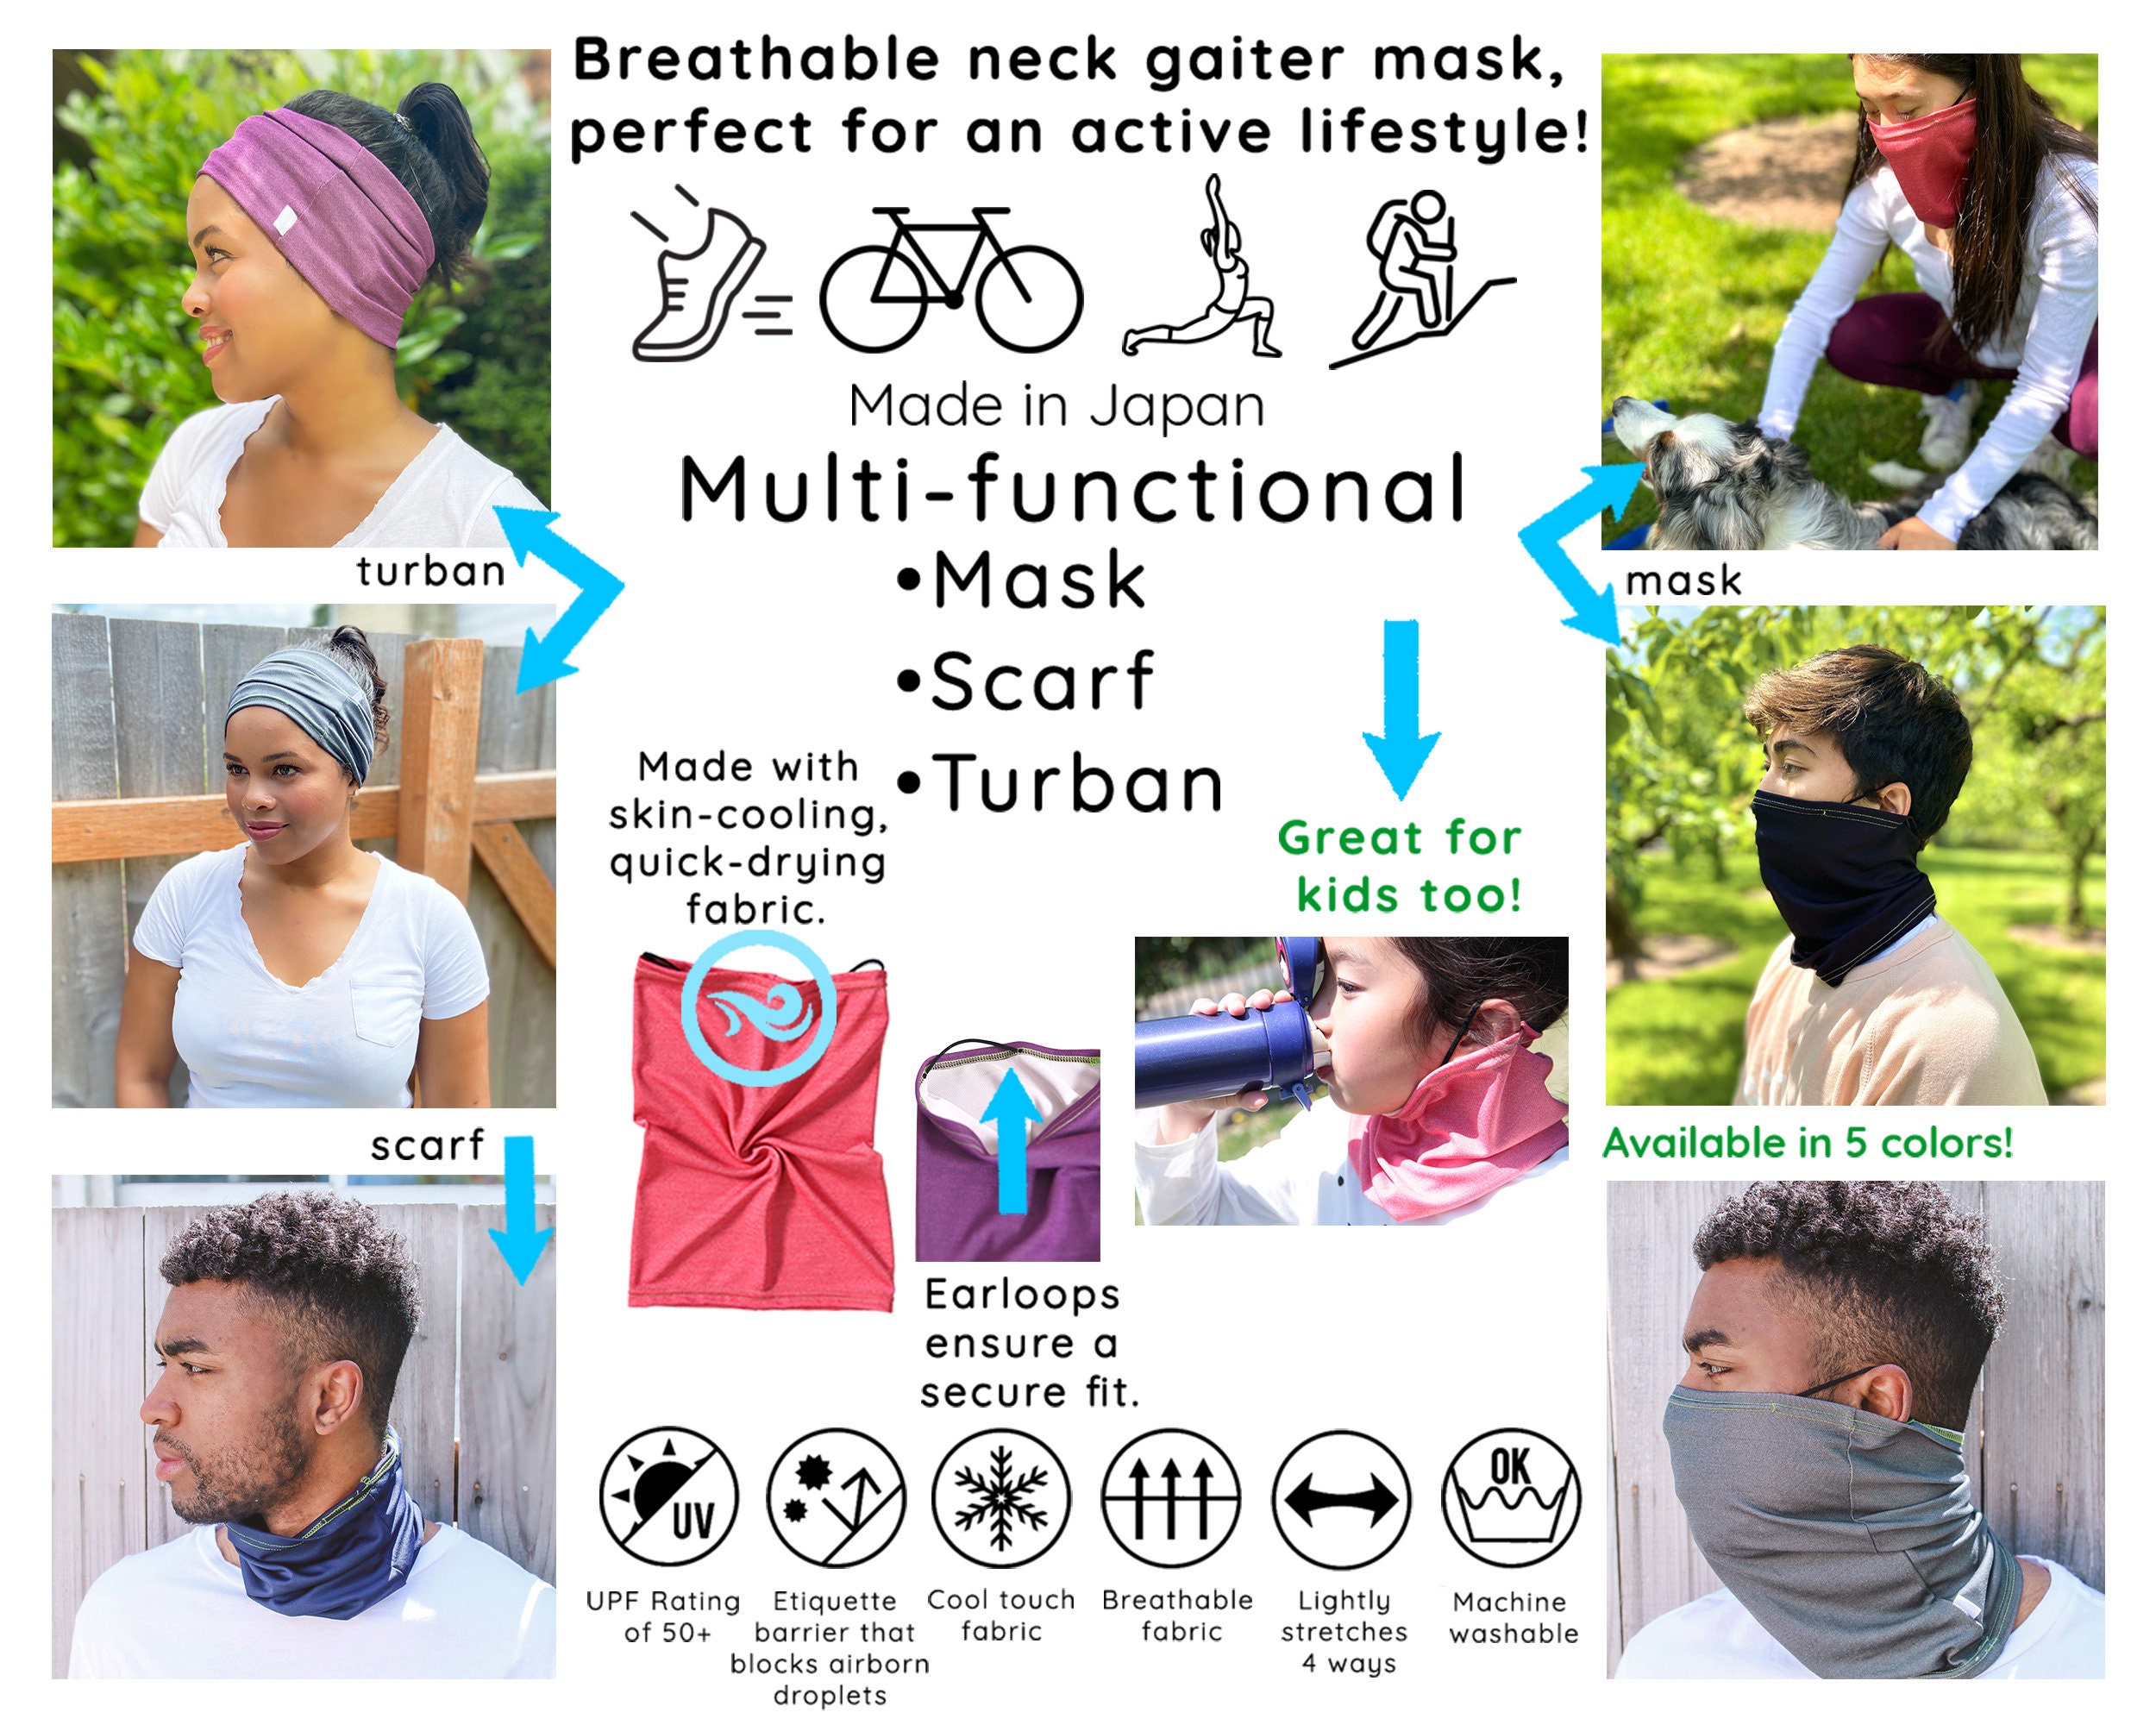 UPF 50 Sun Protection Neck Gaiter Cool, Breathable & Lightweight